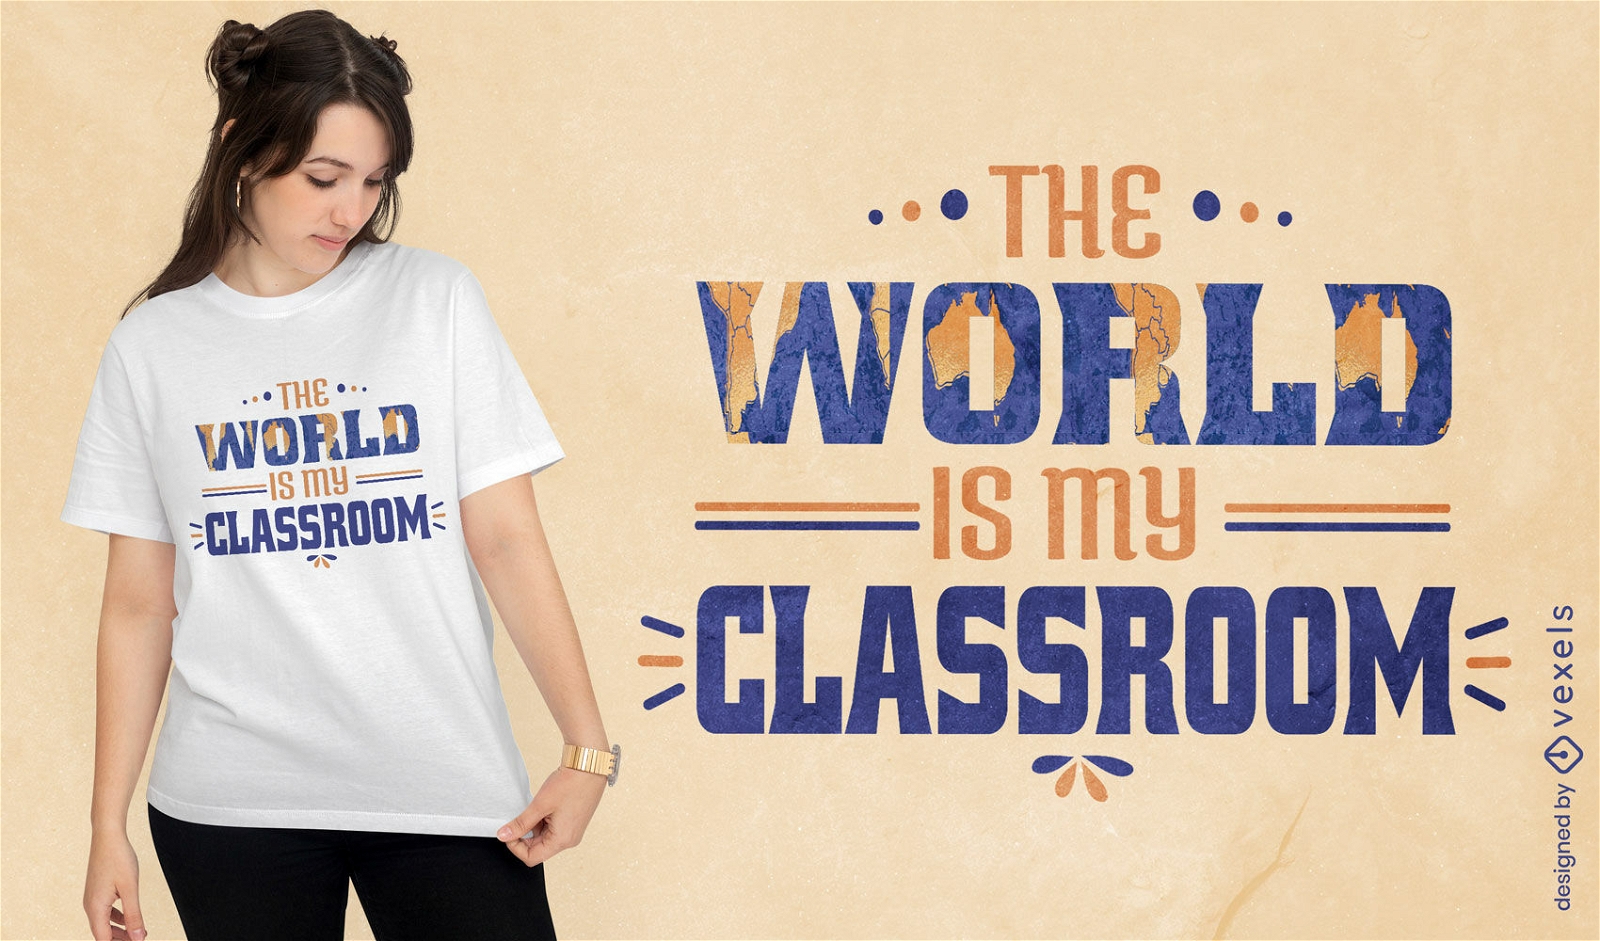 The world is my classroom quote t-shirt design